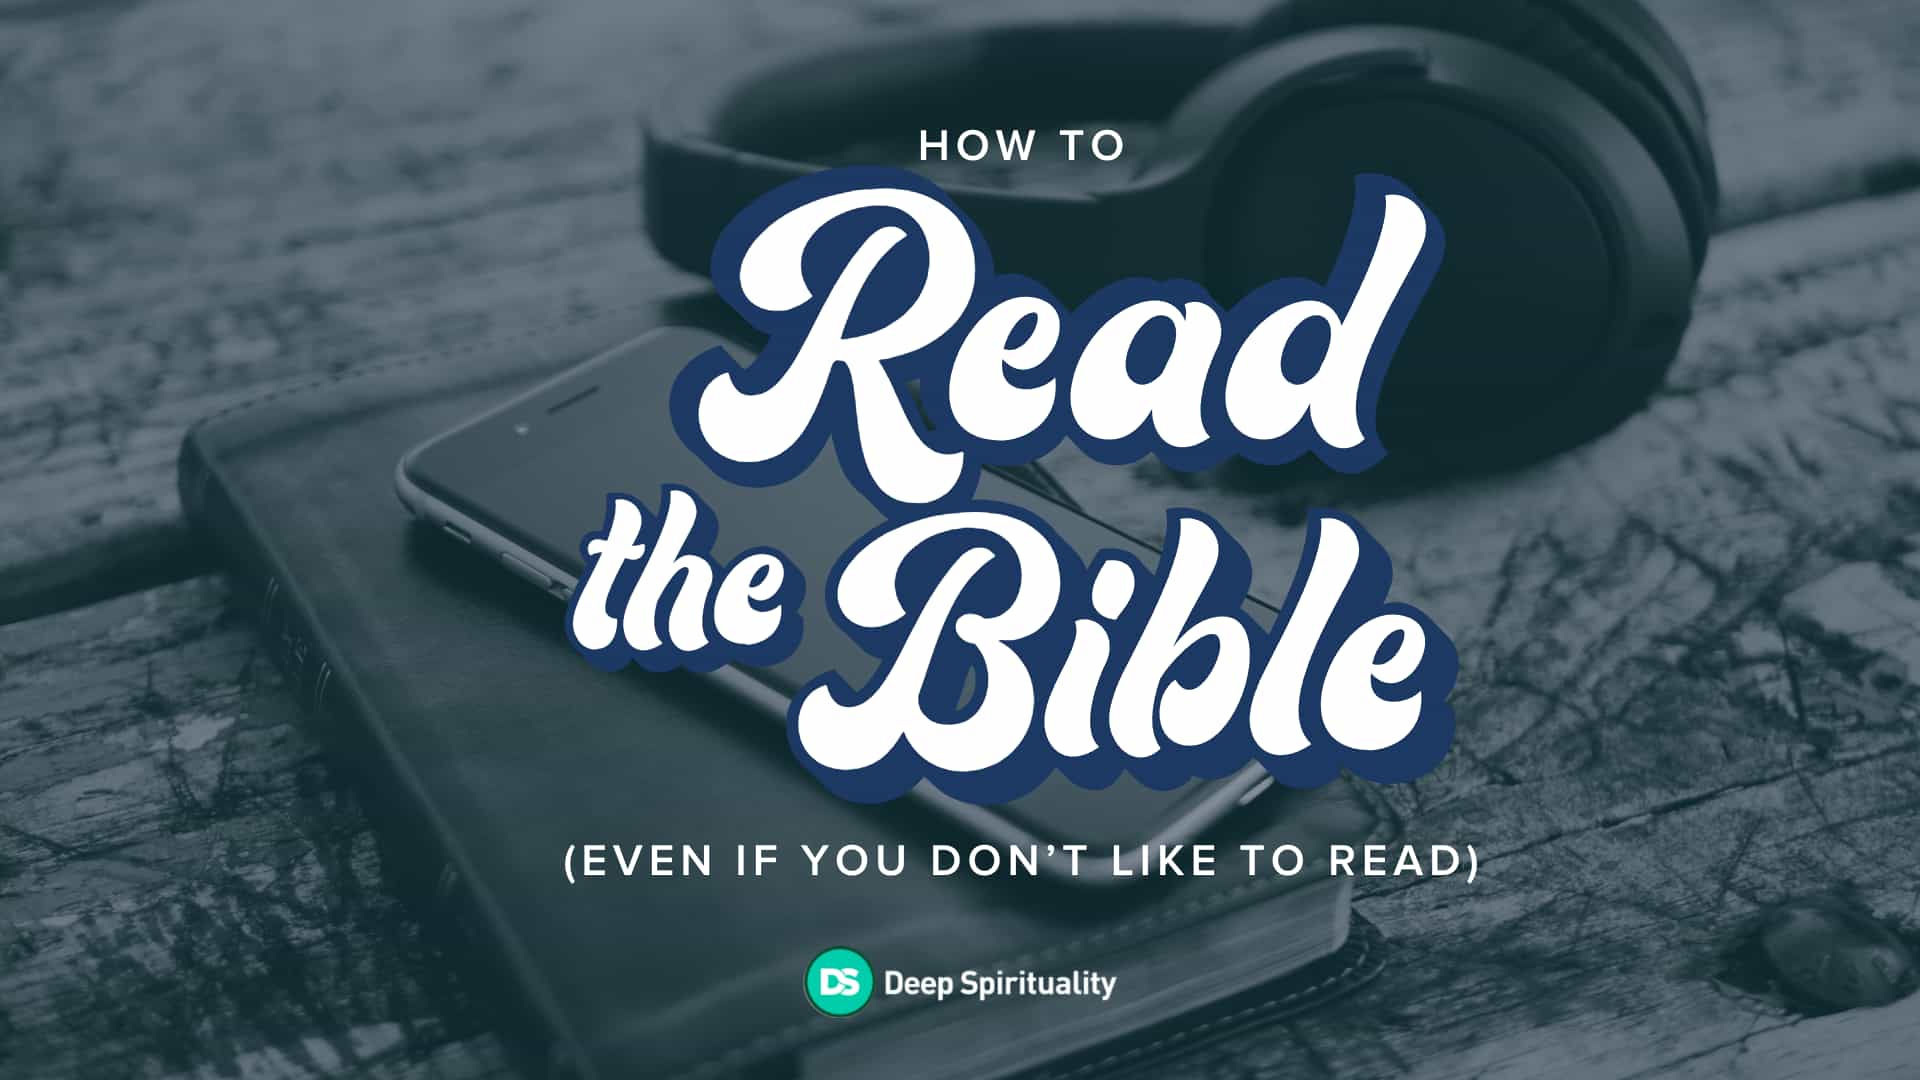 How to read the Bible